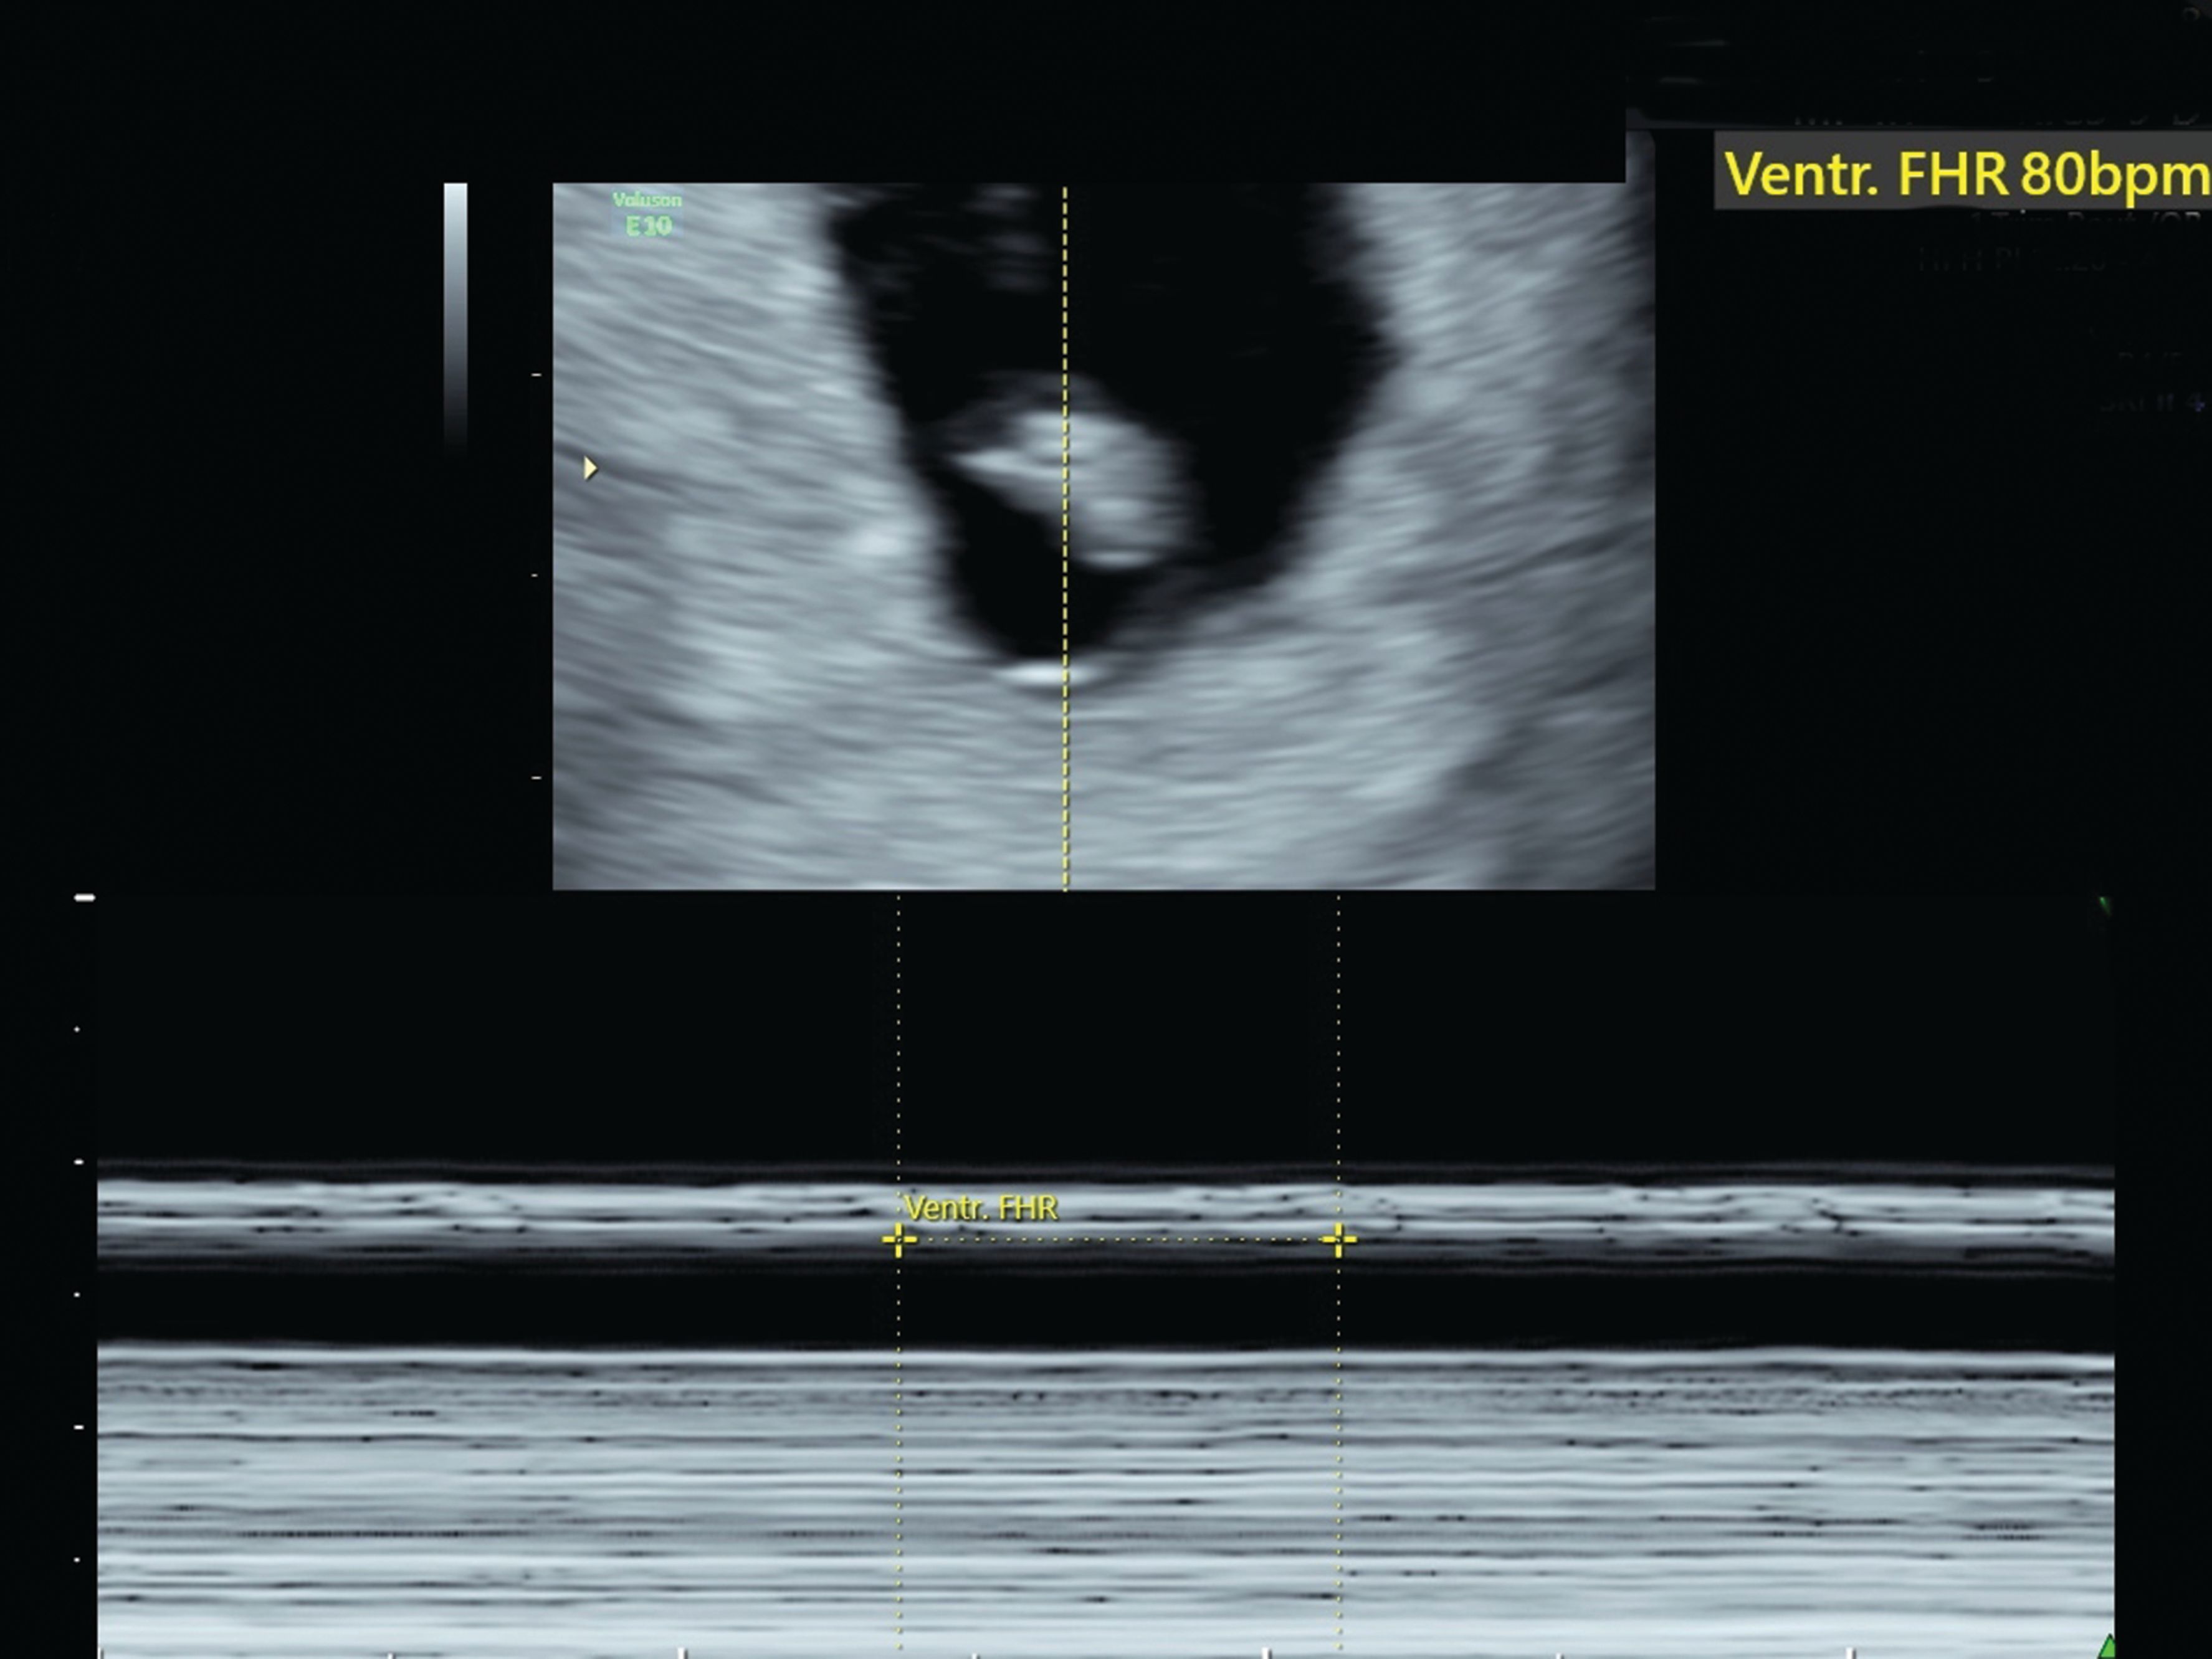 An imaging approach to early pregnancy failure